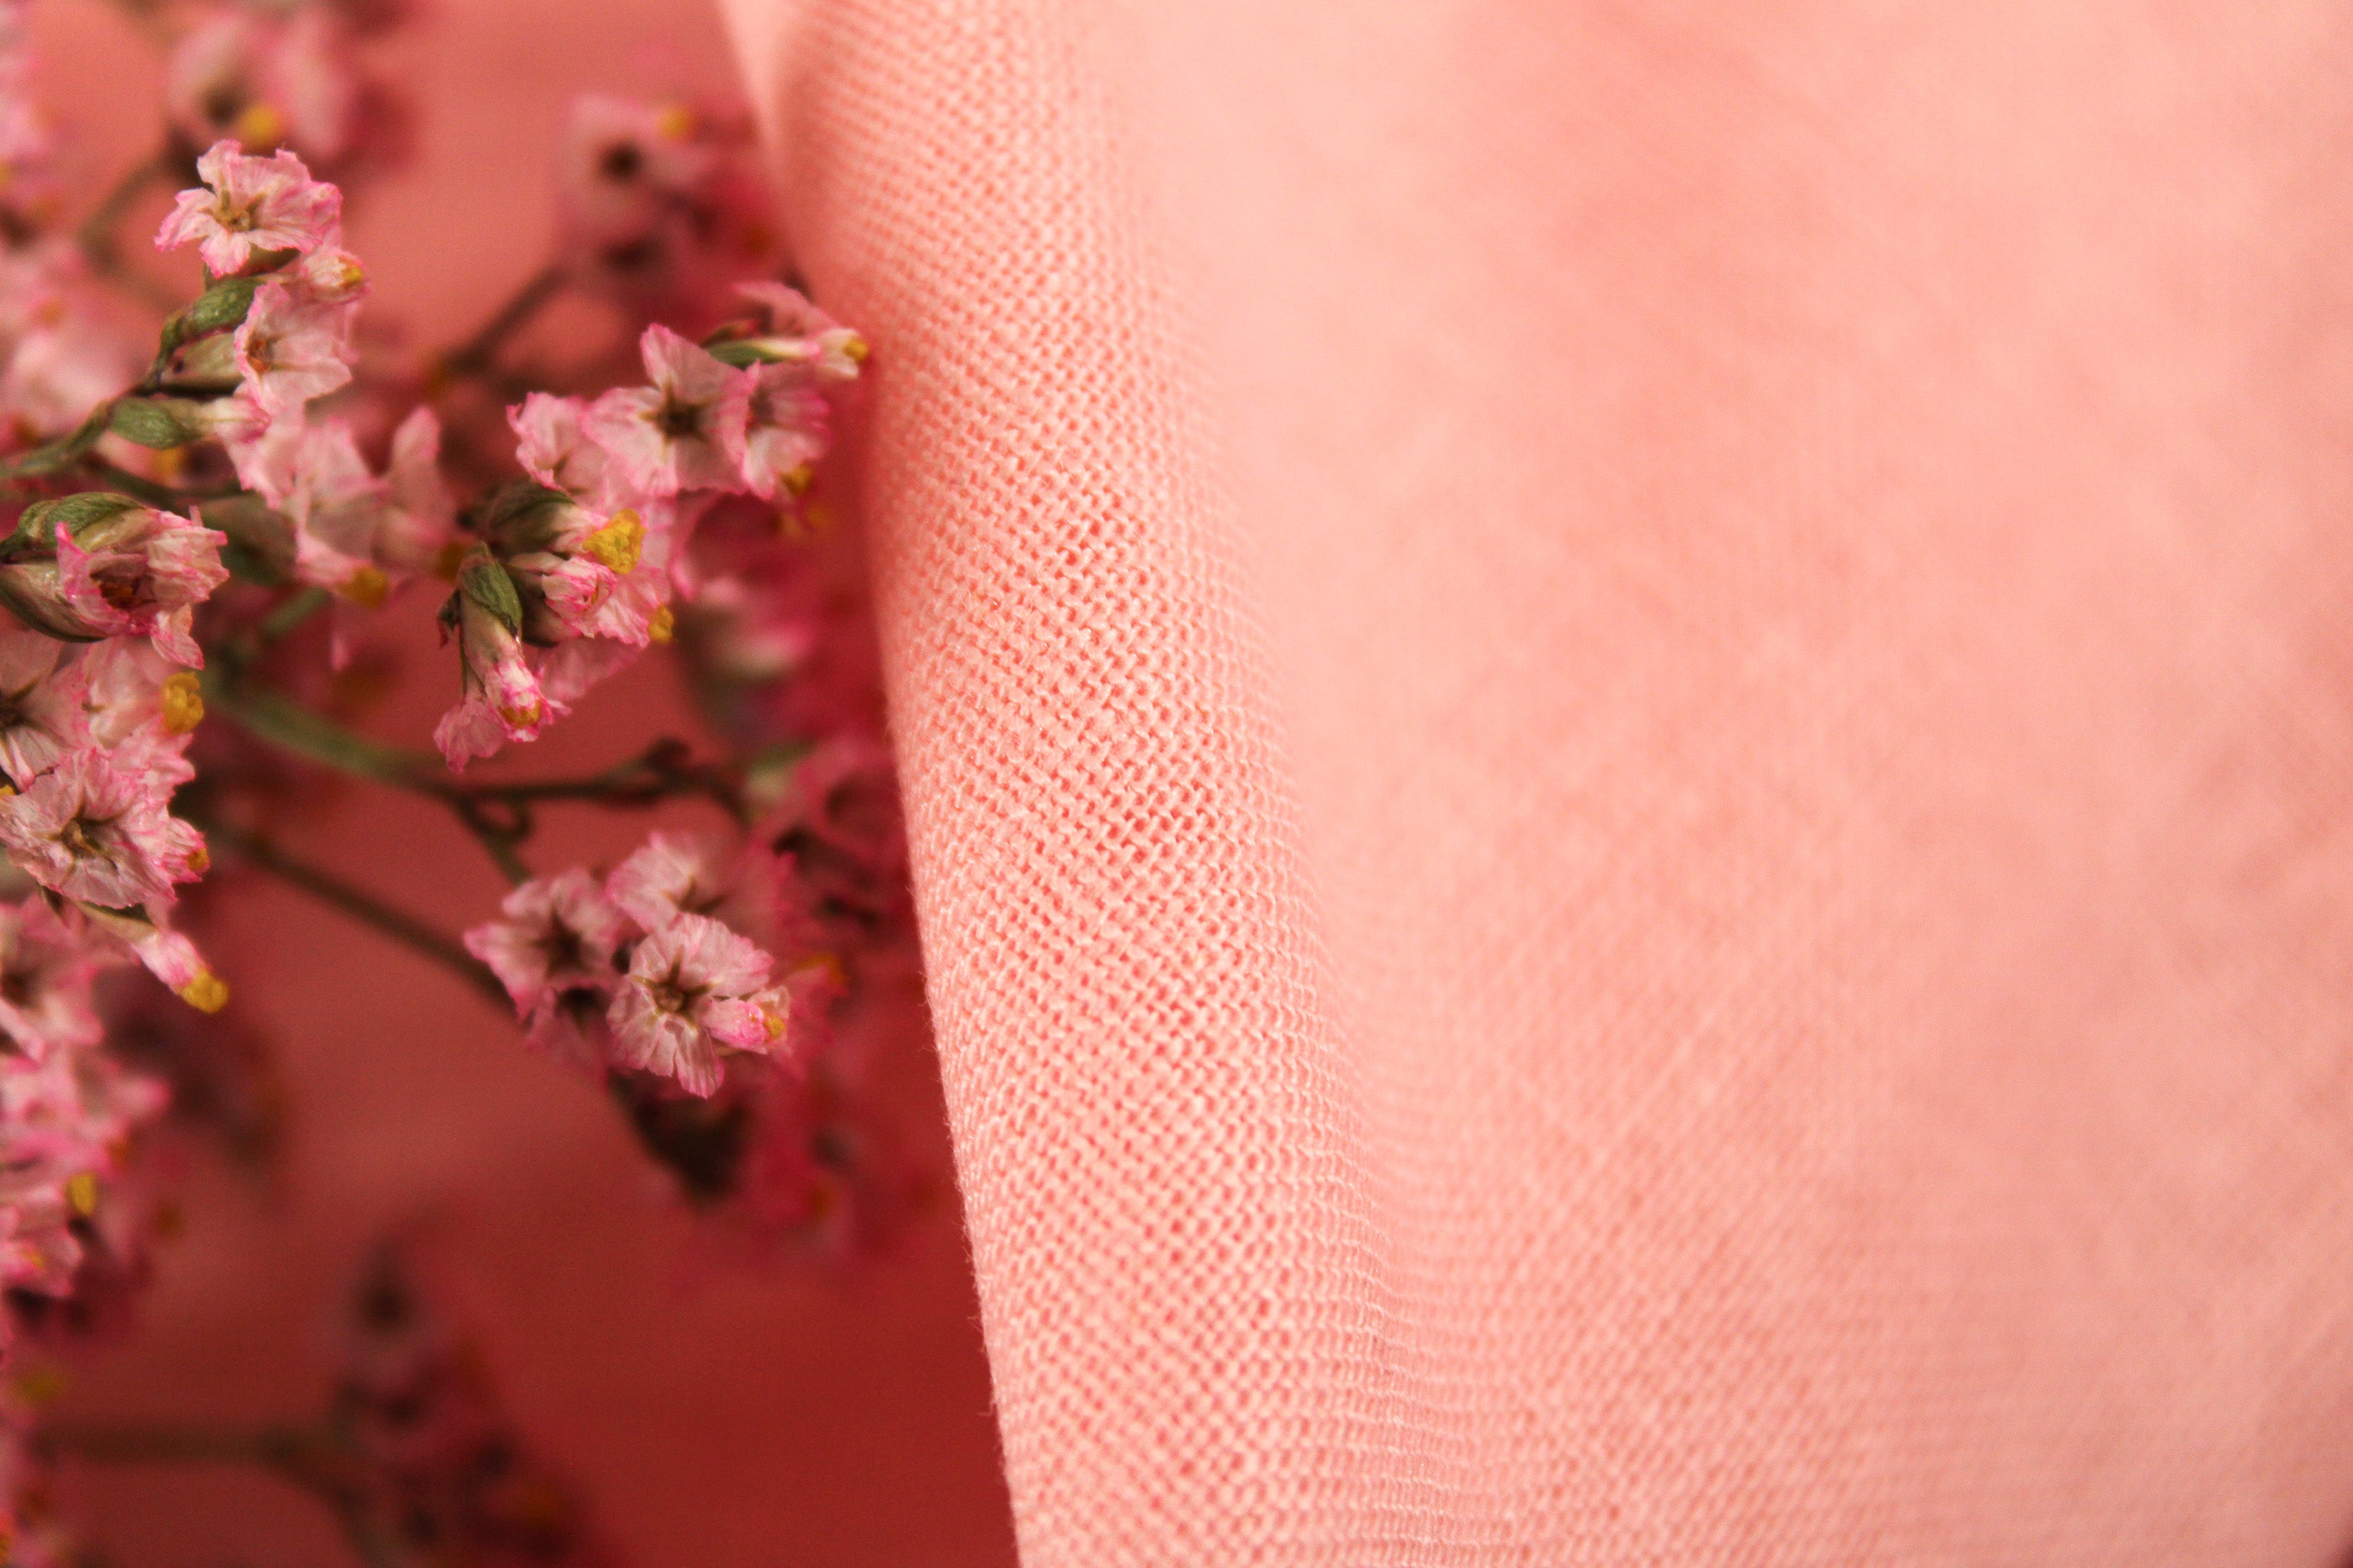 NEW LINEN FABRIC COLLECTION!!! / 100% Linen Fabric by the Yard / Blossom Linen Fabric / Buy Linen Online